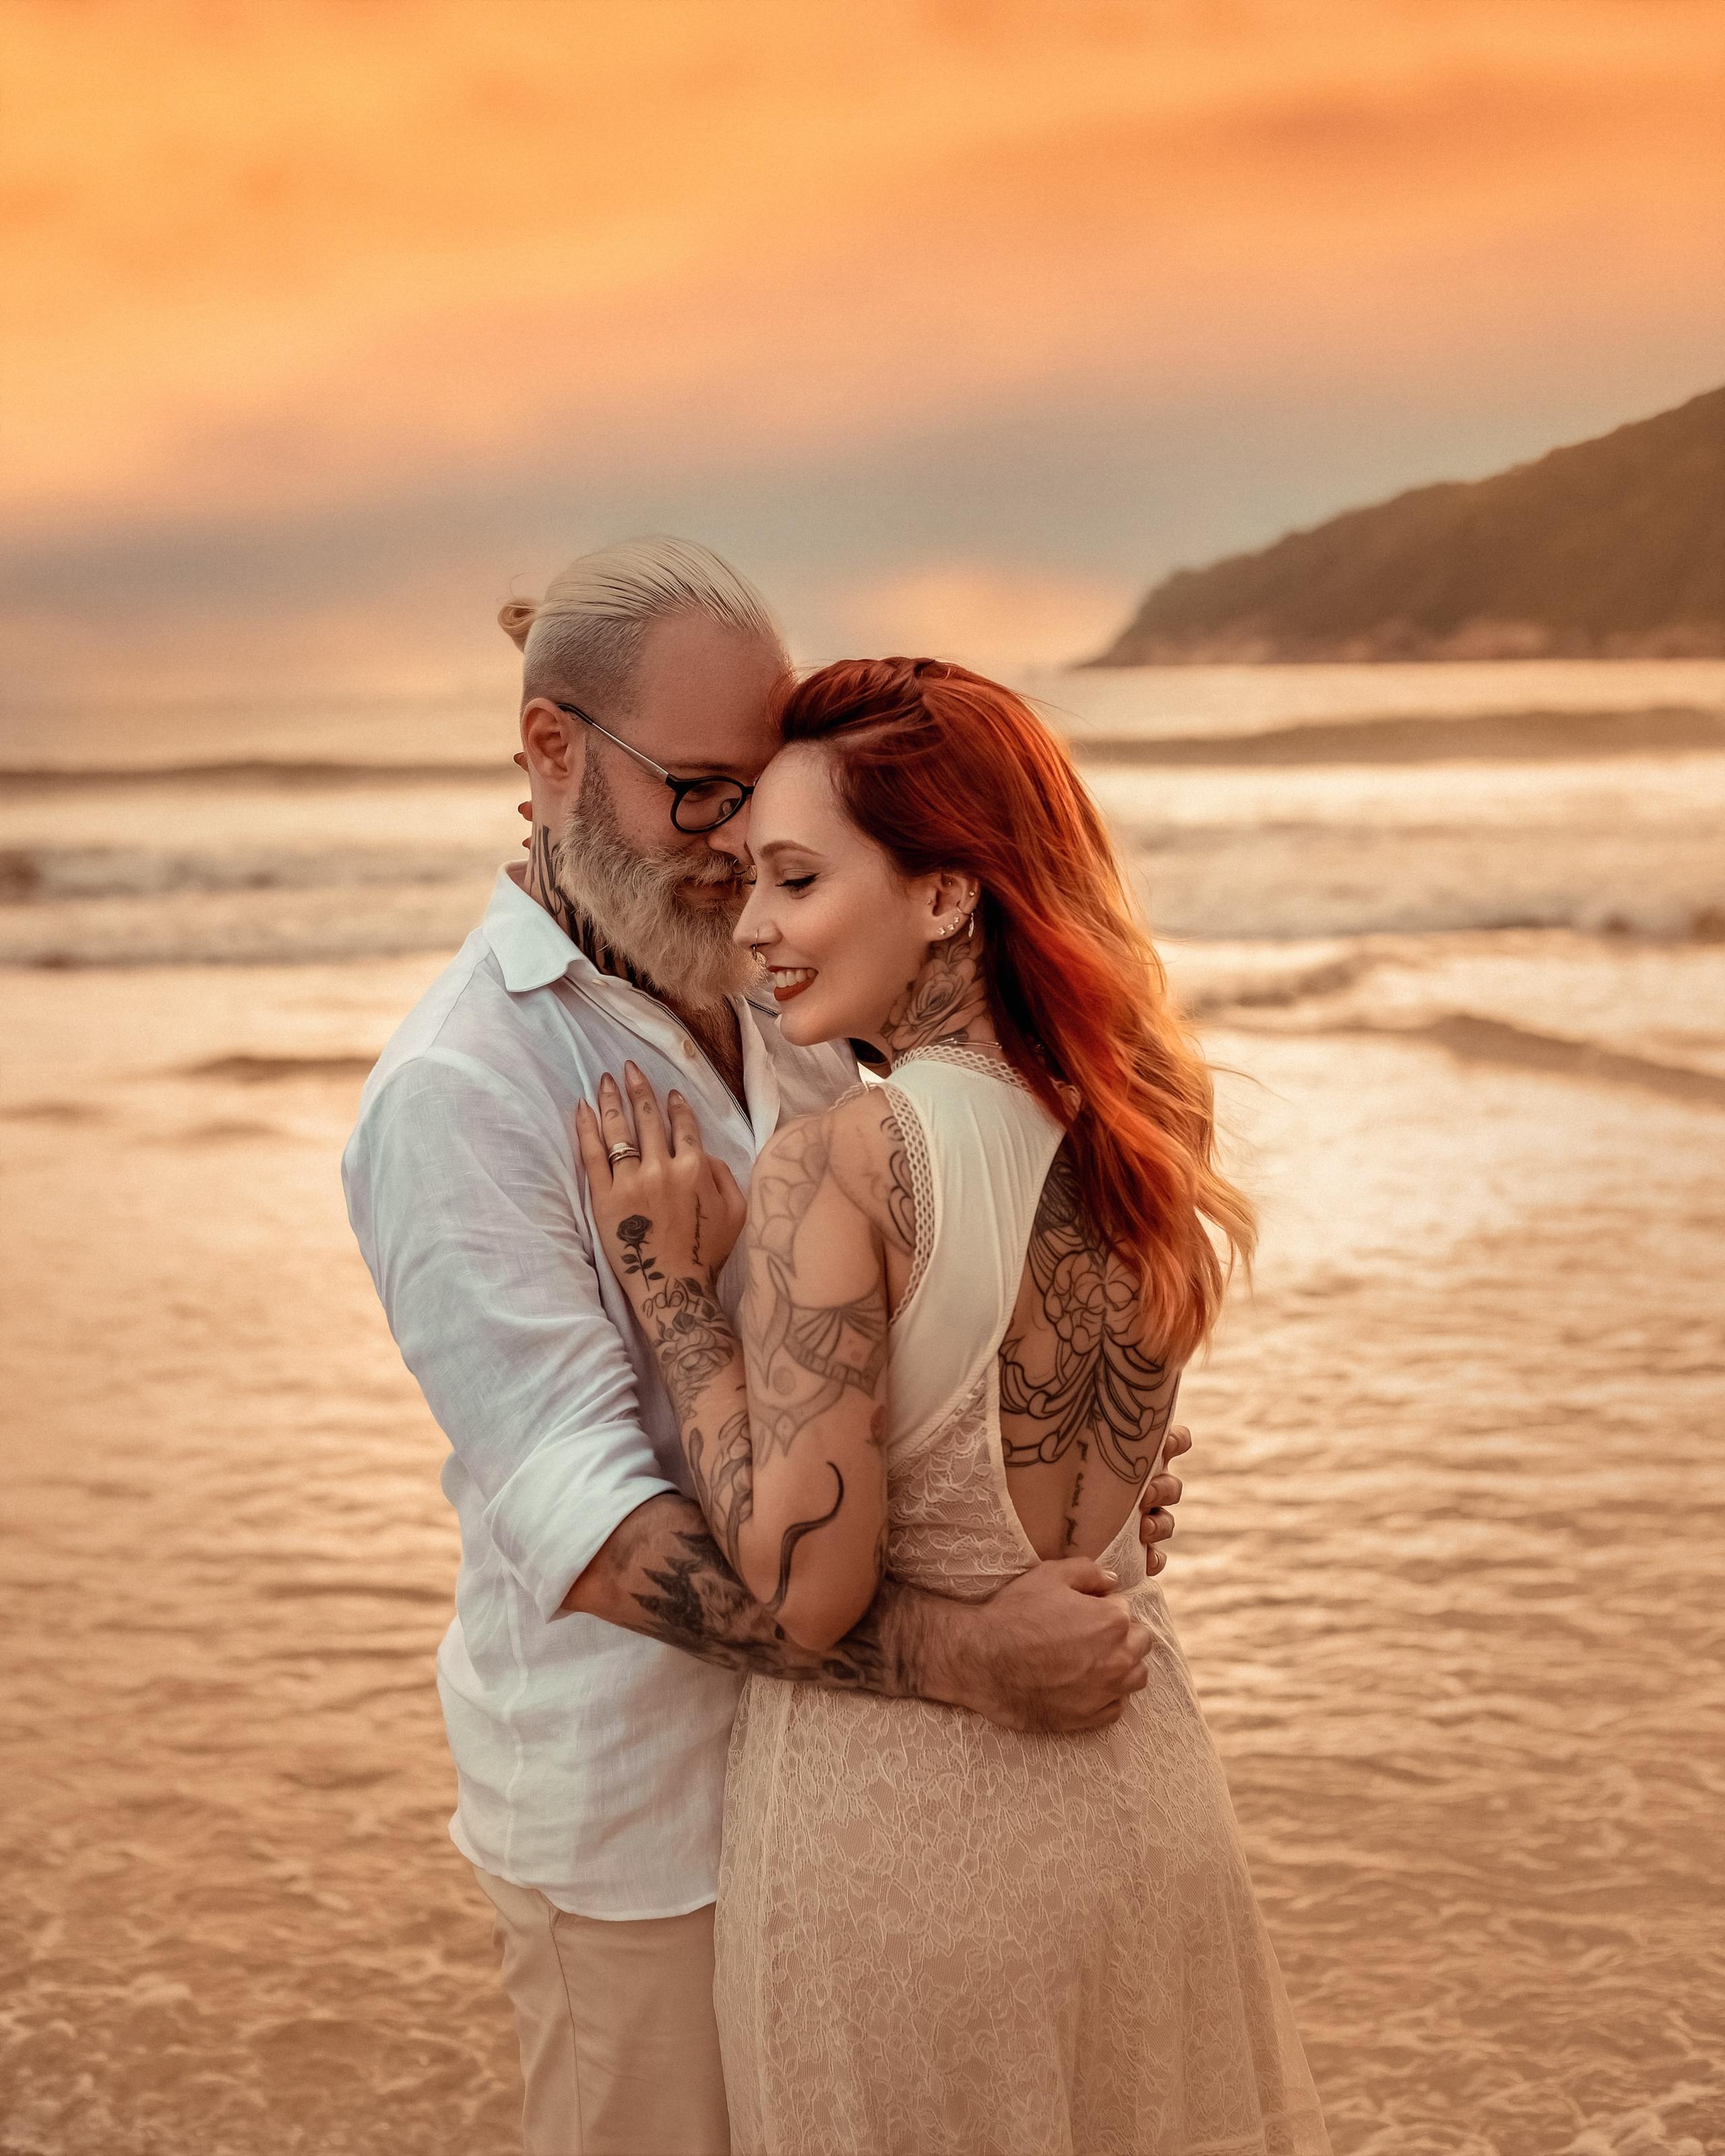 13 Old, Comfortable Couples Share Advice For Newlyweds